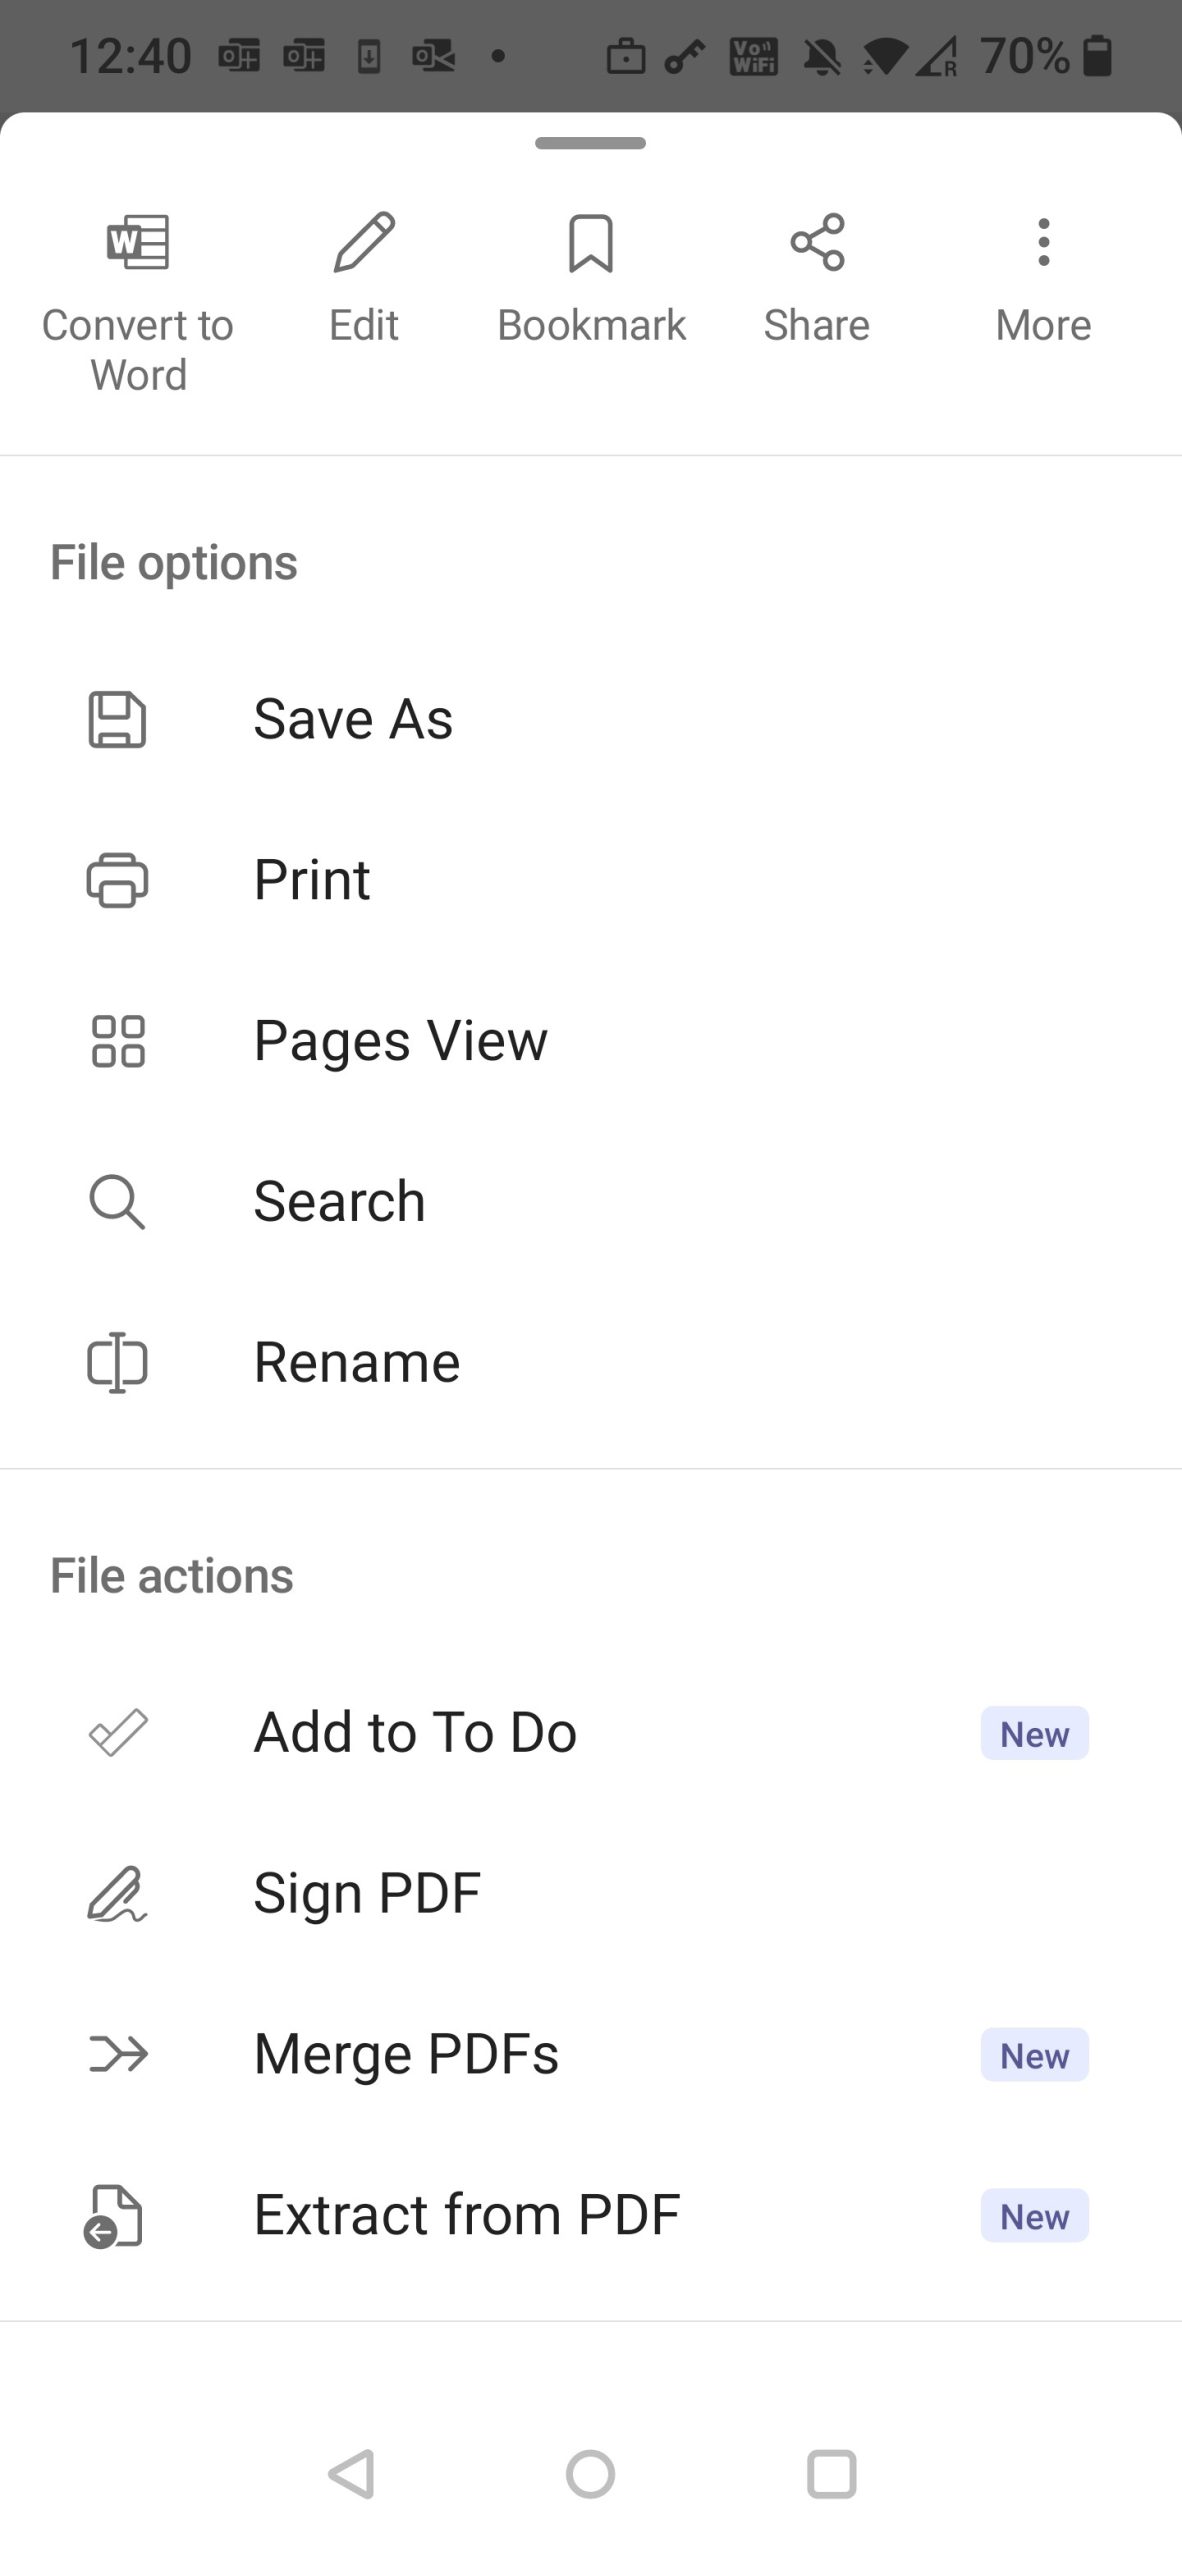 Sign PDF command on the More menu